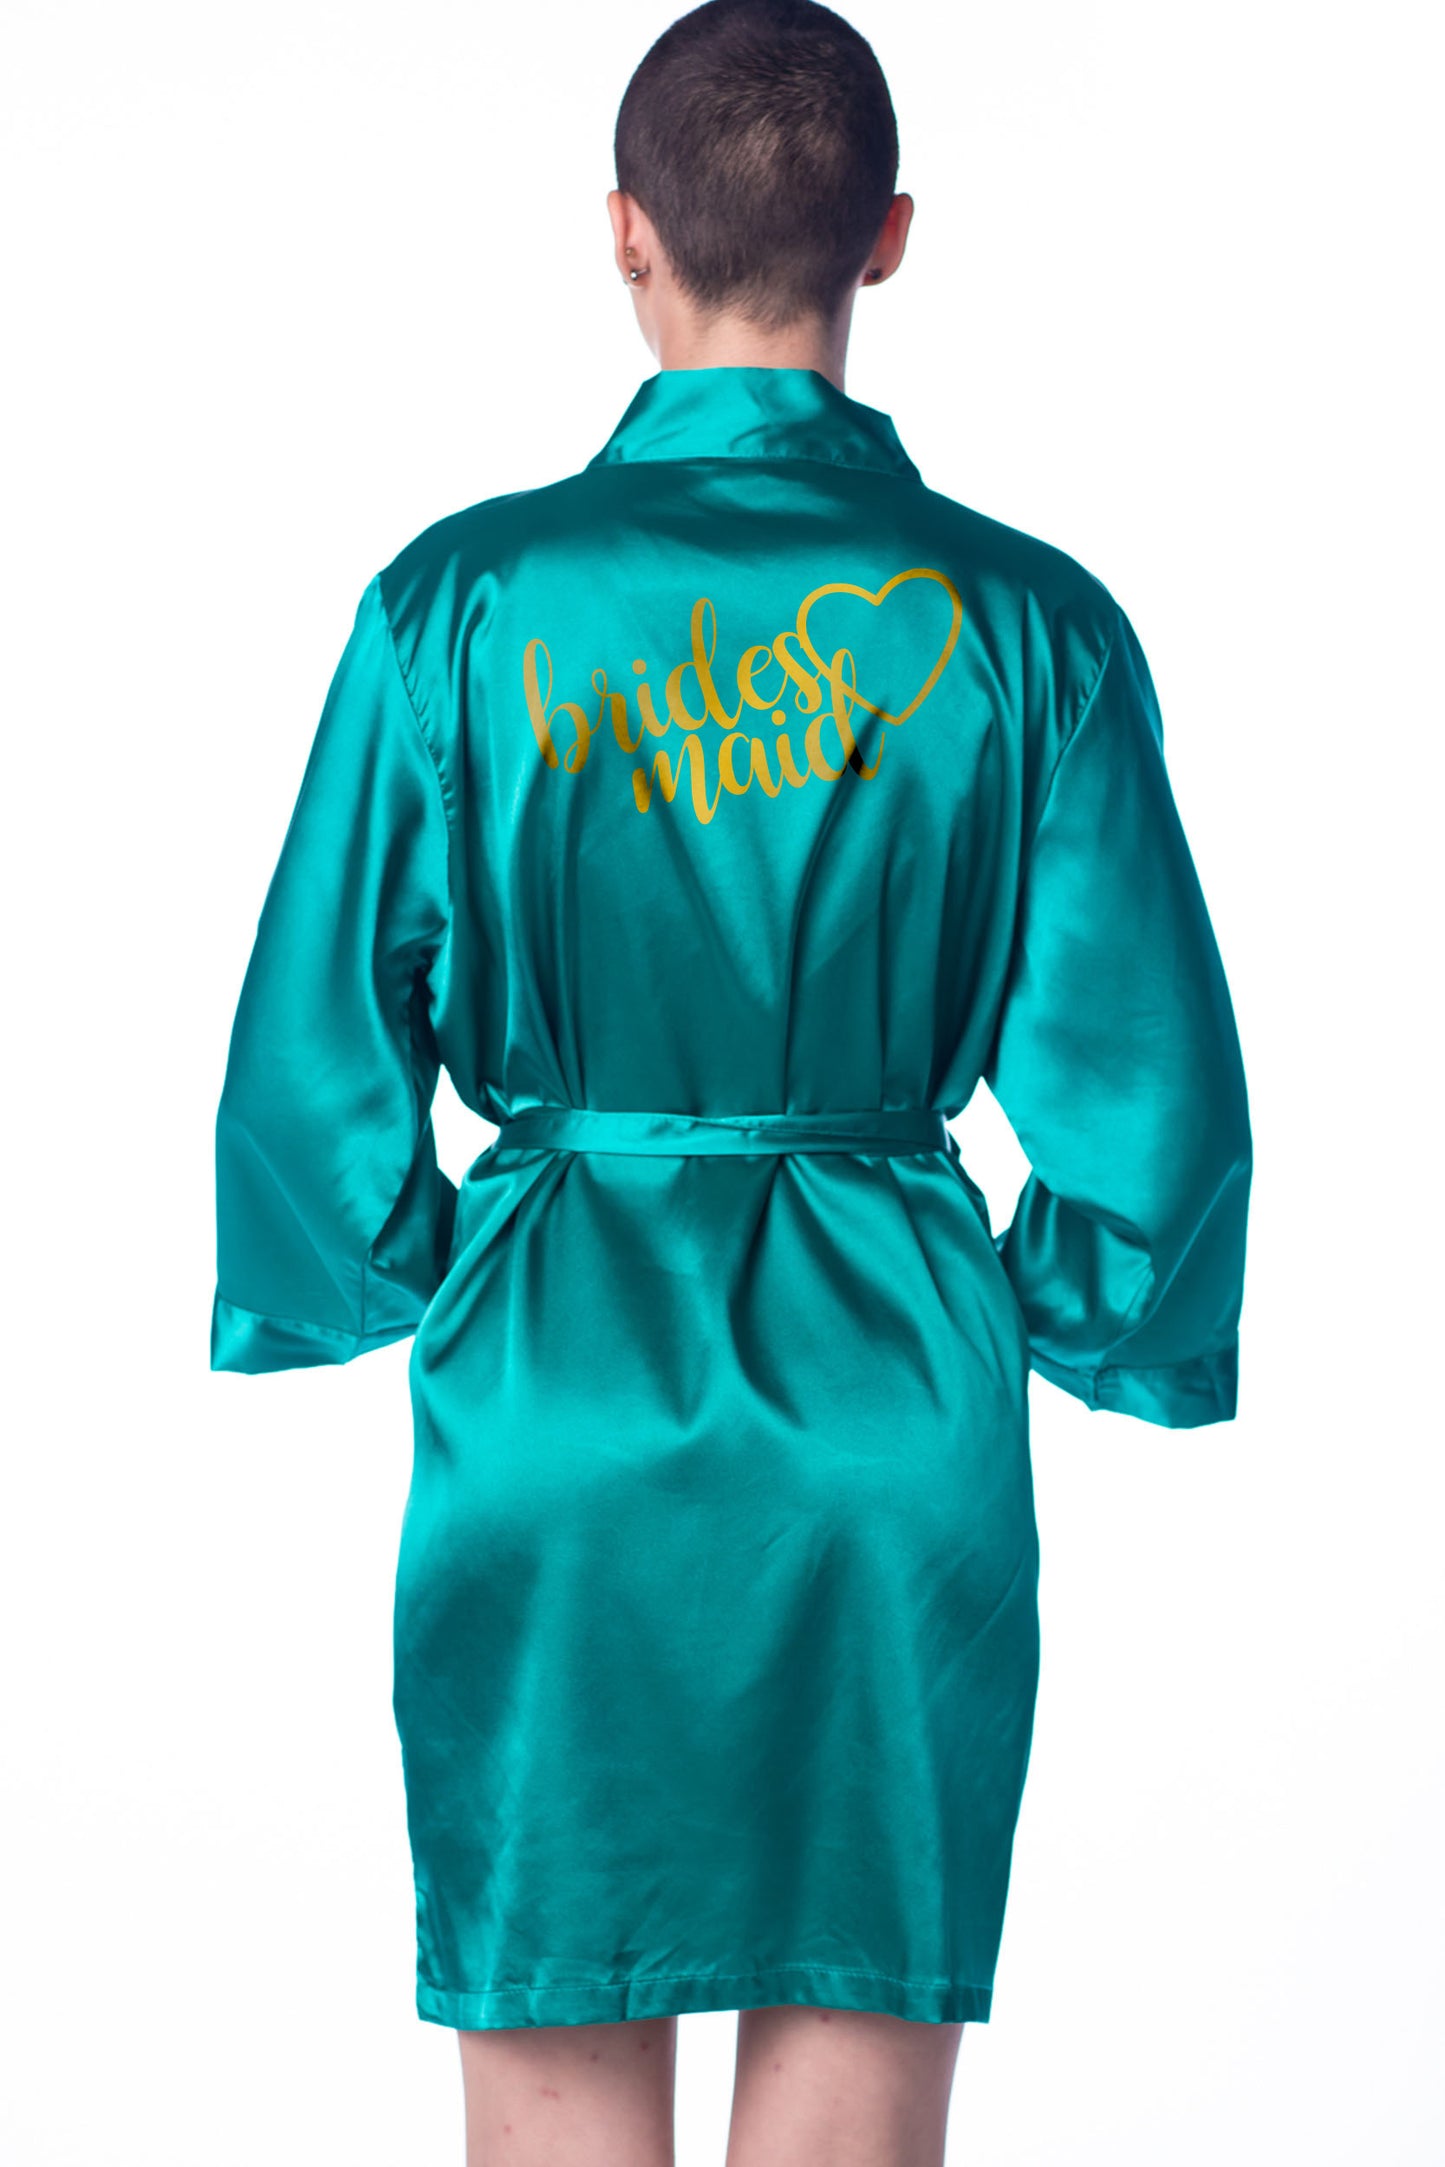 S/M "Bridesmaid" Teal Satin Robe - Heart in Metal Gold (Clearance Item)